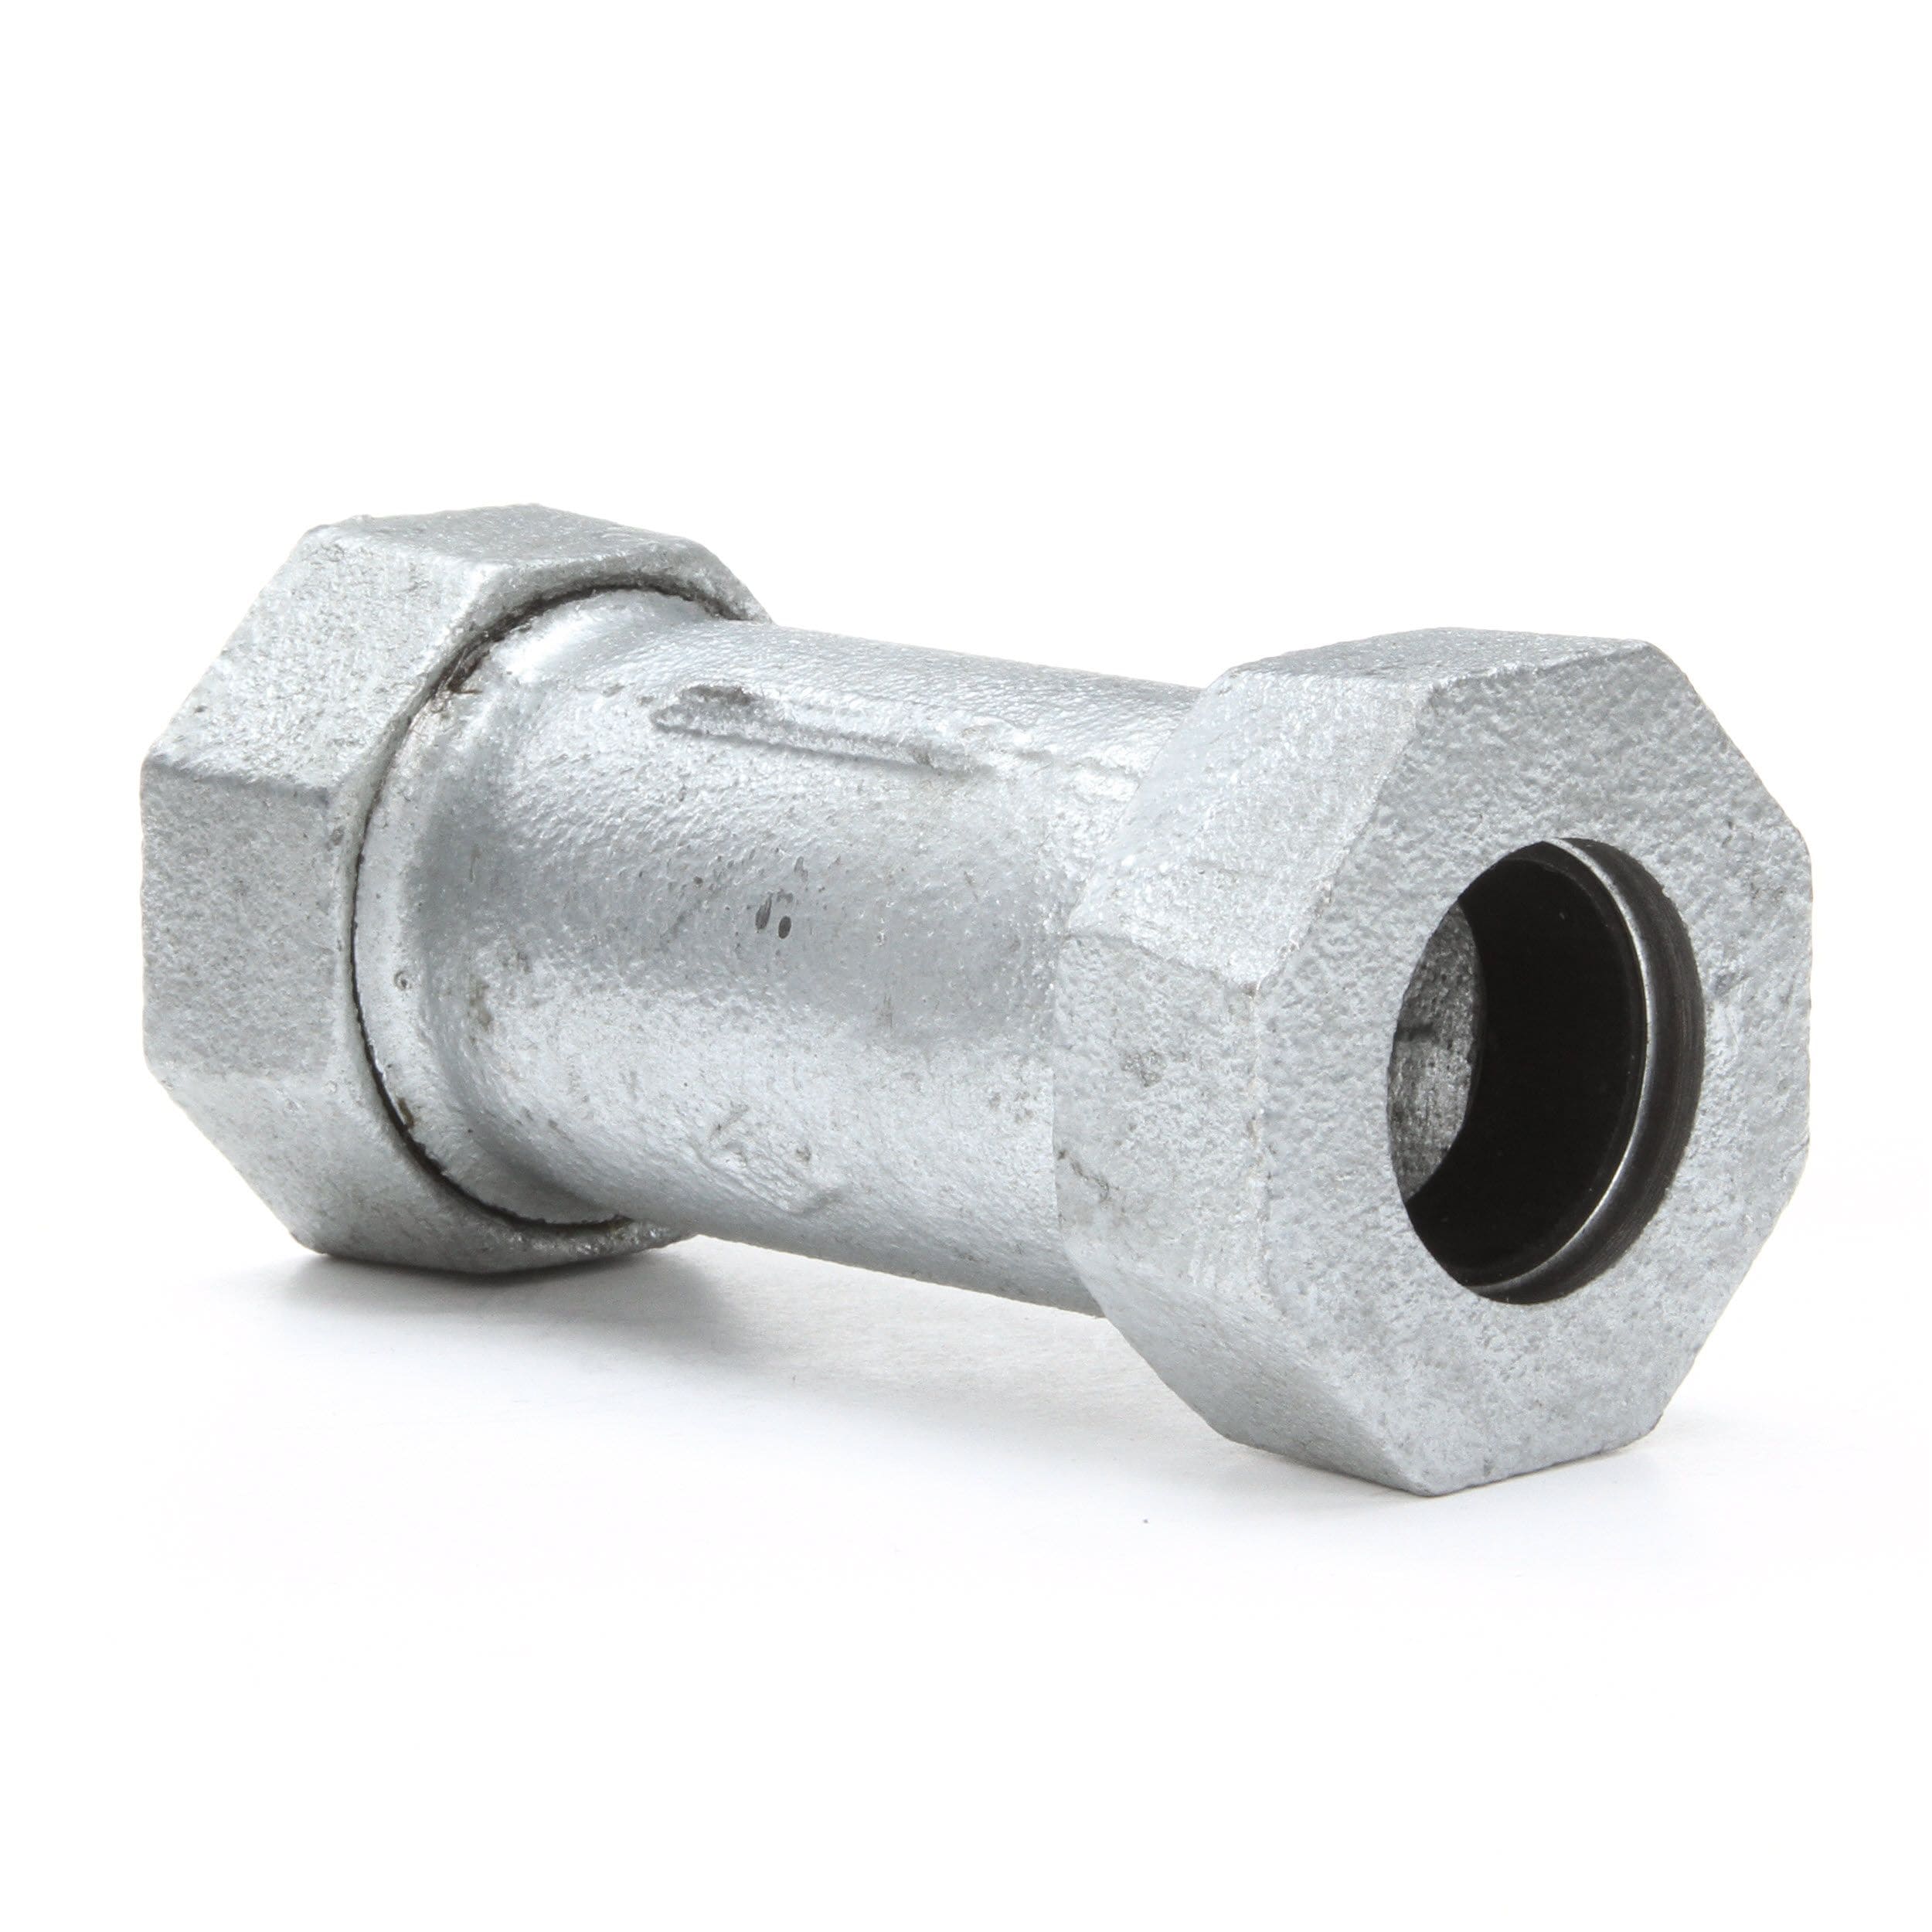 3/4 Galvanized Compression Coupling Pro-line 22465 Malleable 150 LBS 